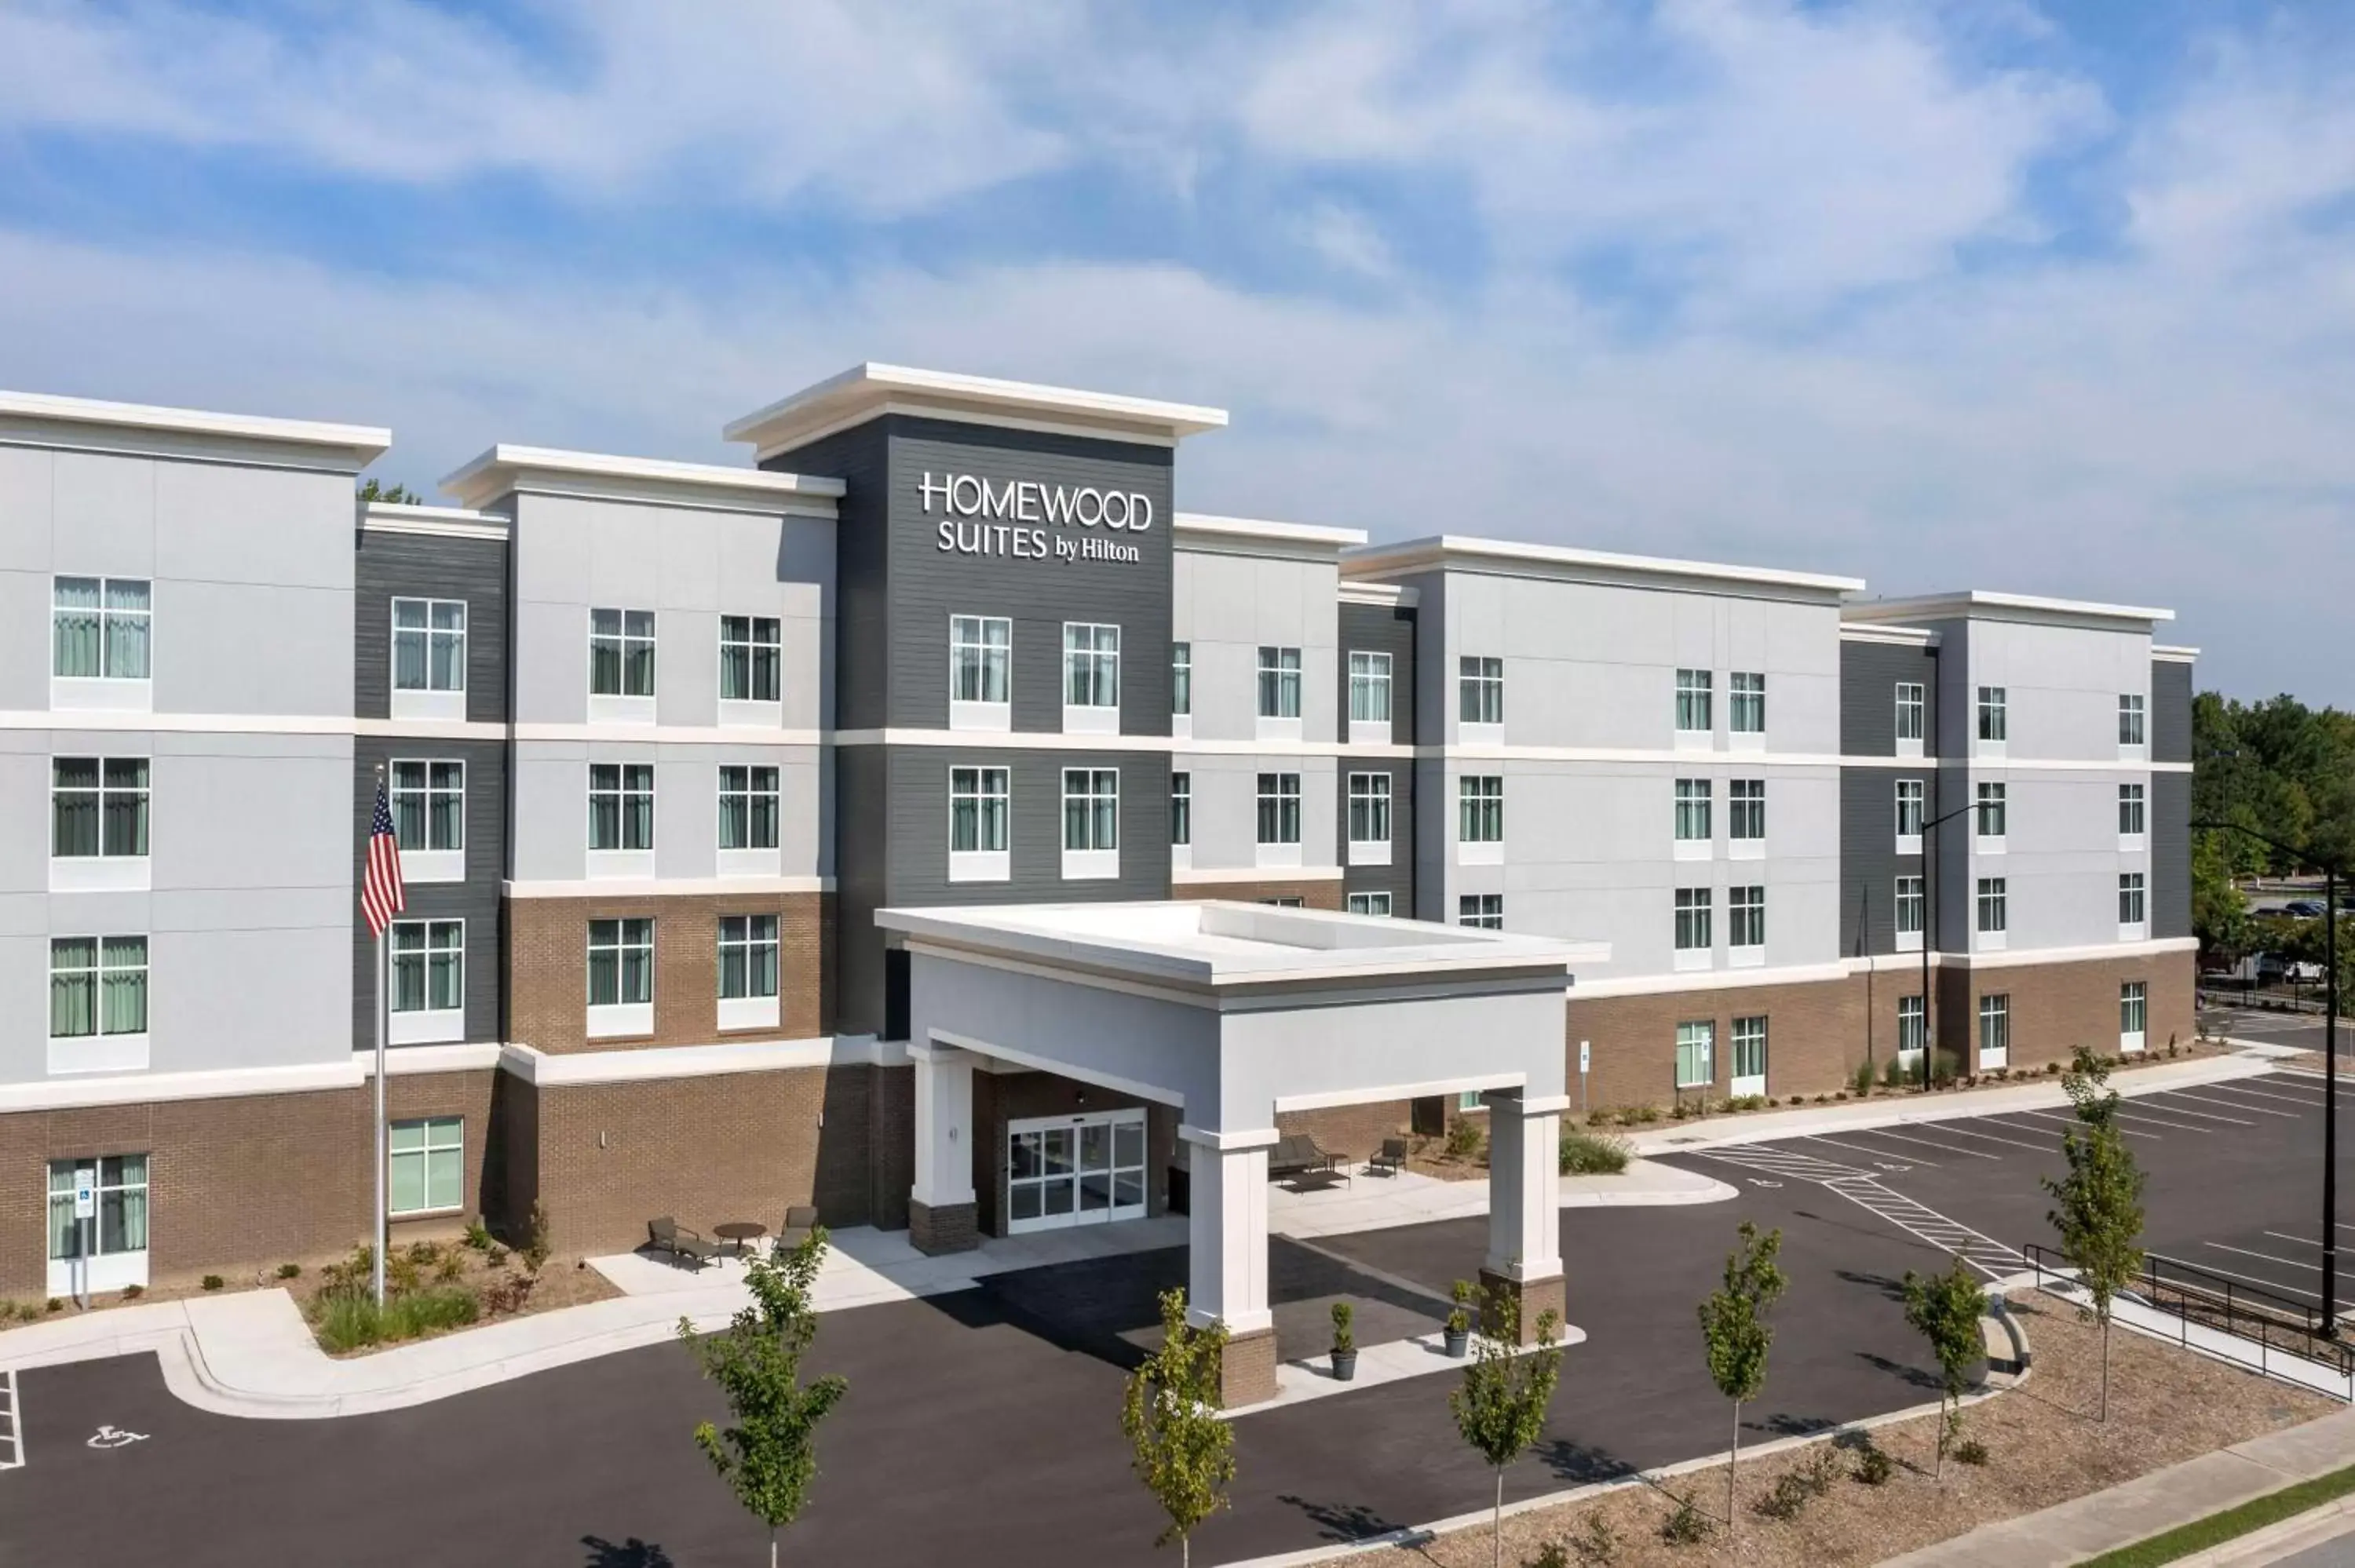 Property Building in Homewood Suites By Hilton Greenville, NC